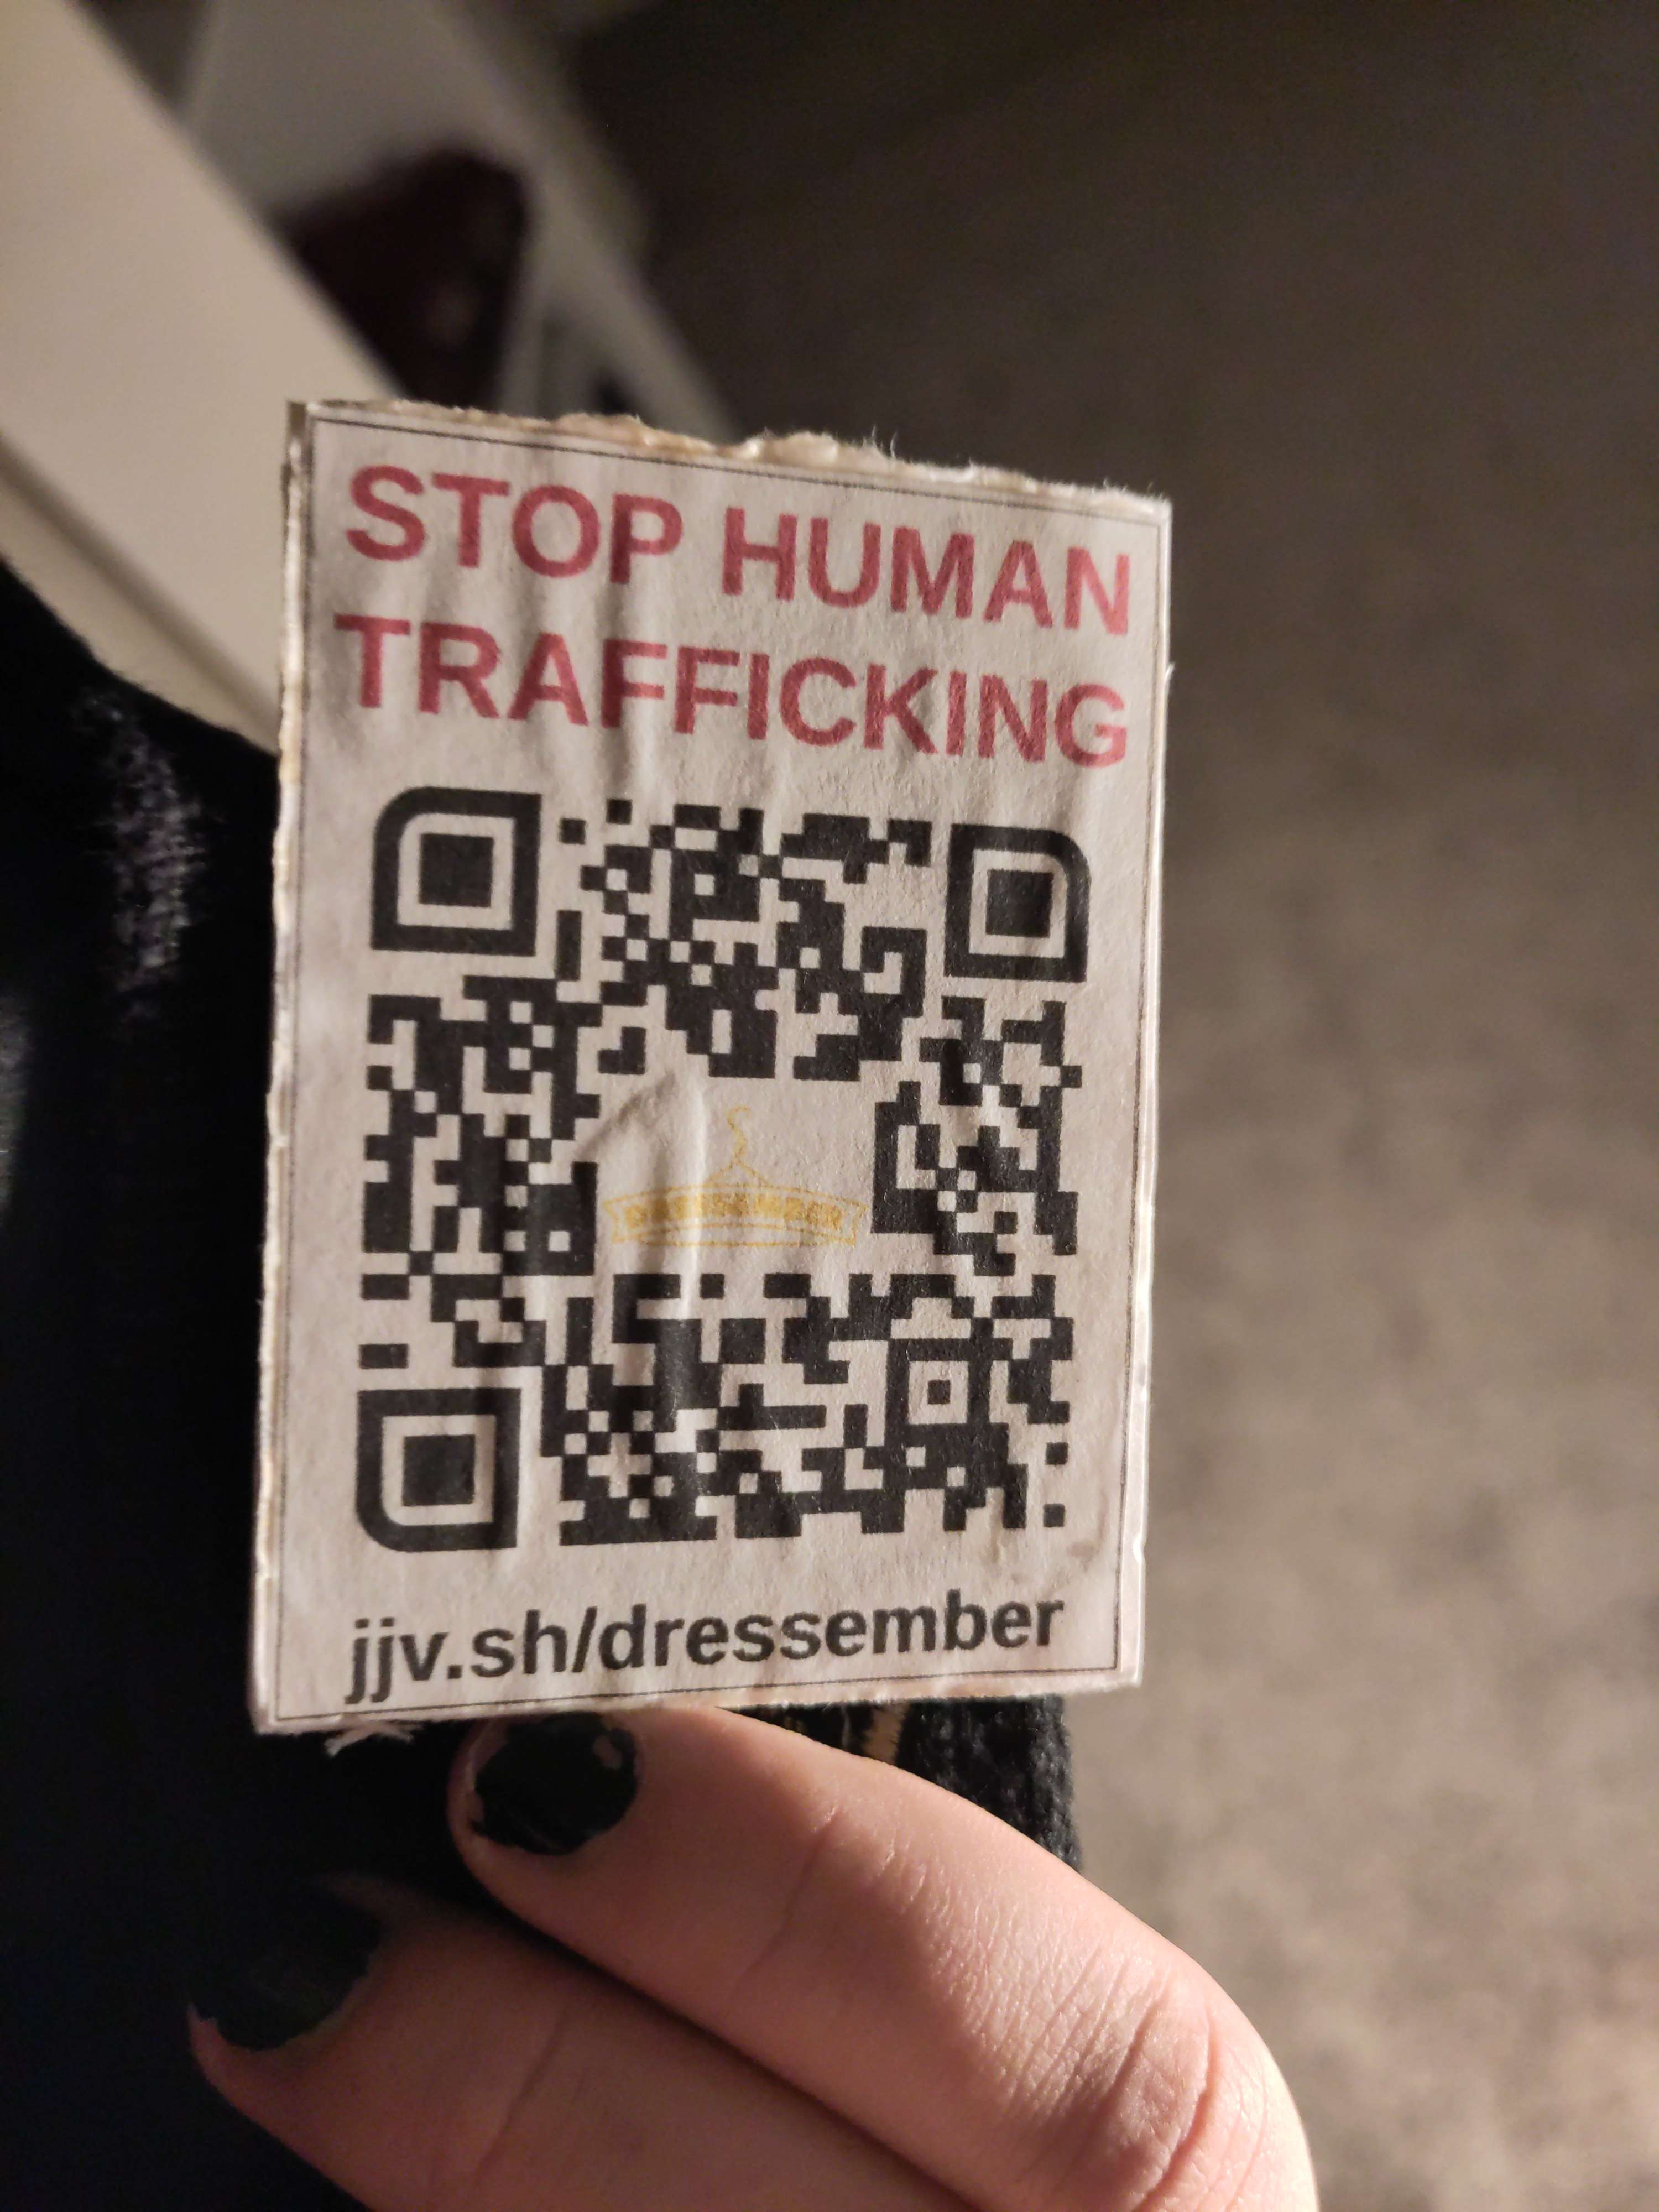 a qr code labelled &ldquo;Stop Human Trafficking&rdquo; linking to the donation page jjv.sh/dressember